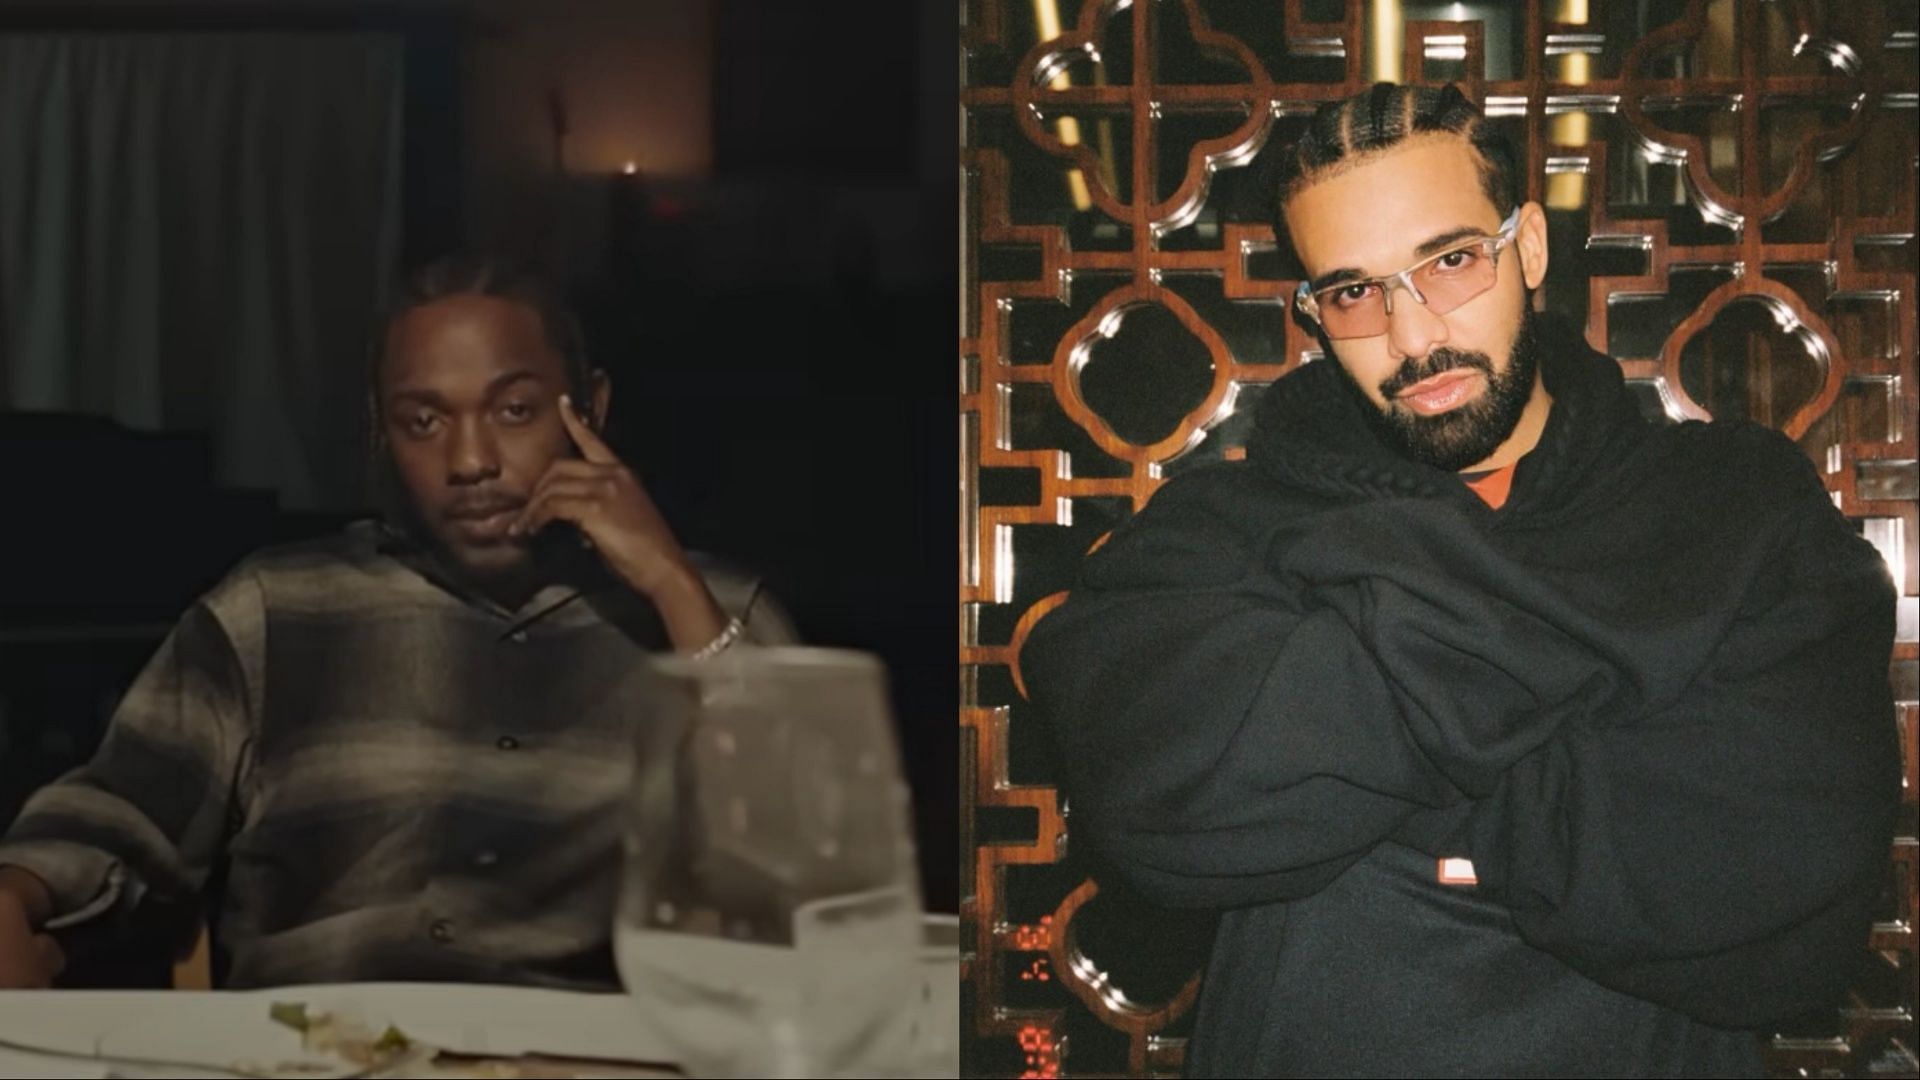 Internet reacts as DJ allegedly gets kicked out of Toronto club for playing Kendrick Lamar